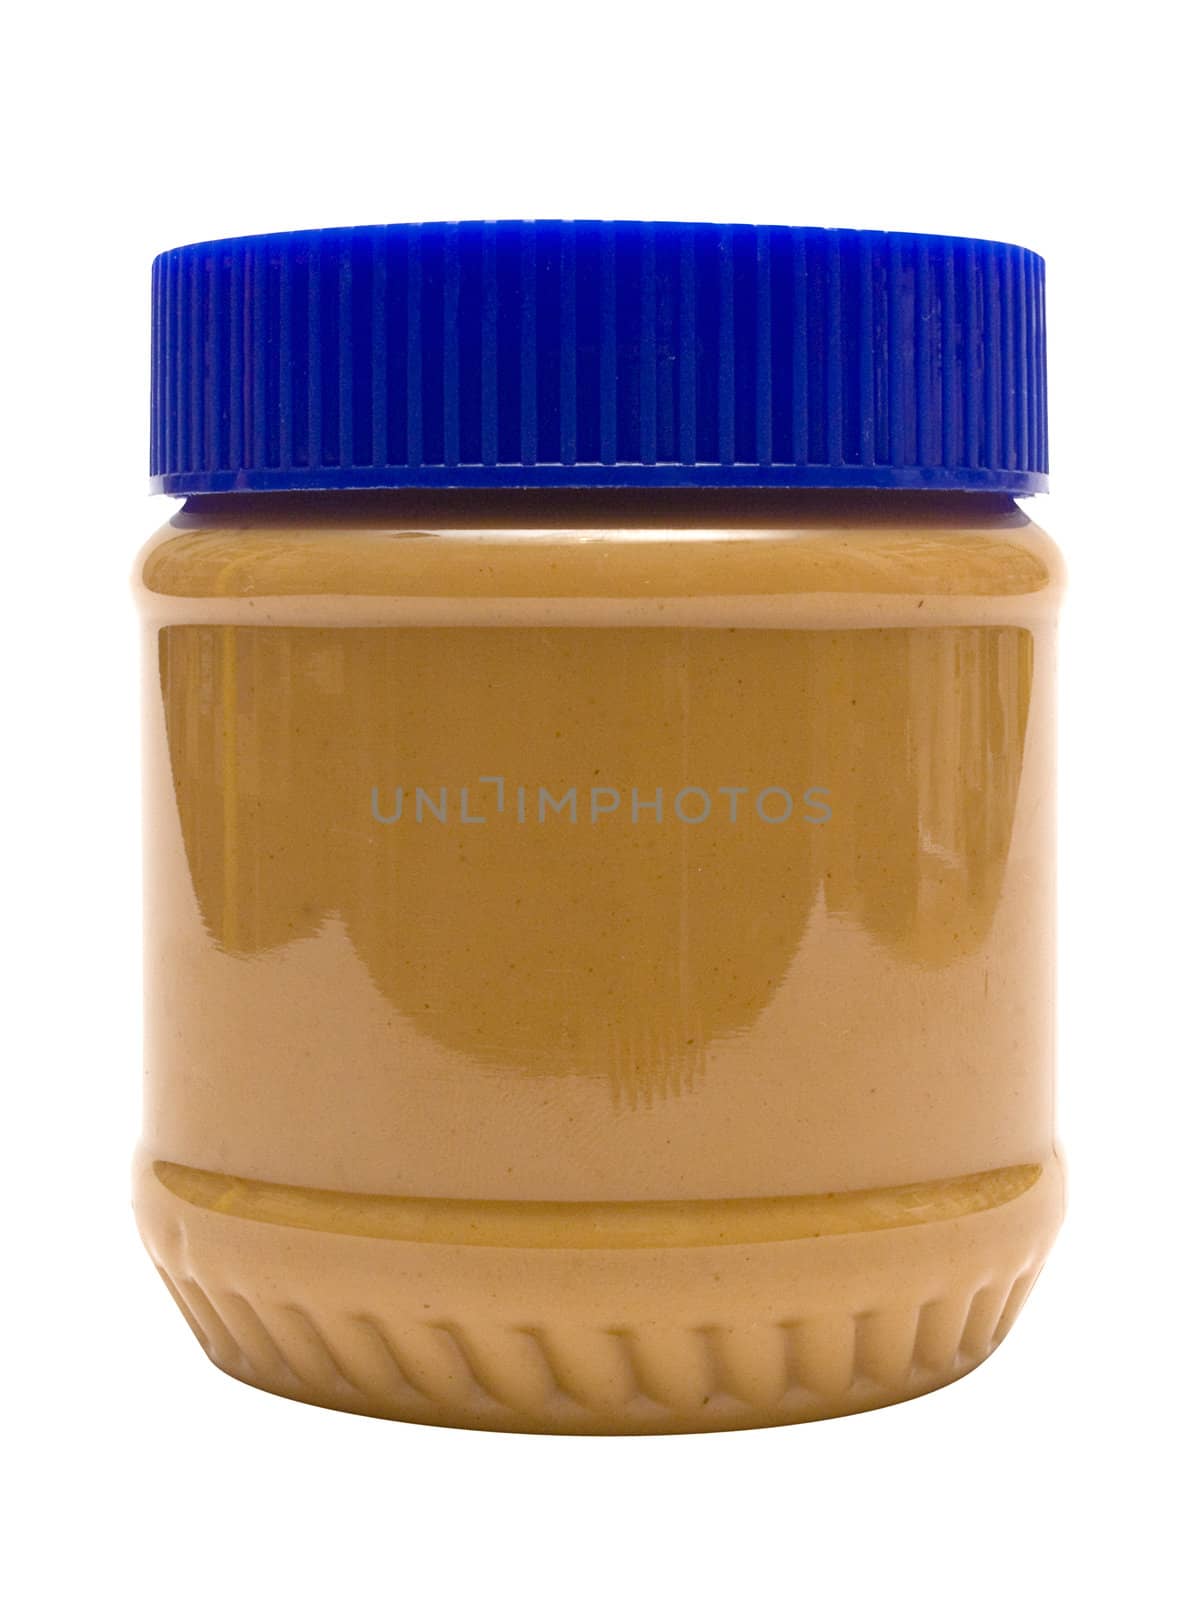 Closed glass of peanut butter isolated on a white background. File contains clipping path.